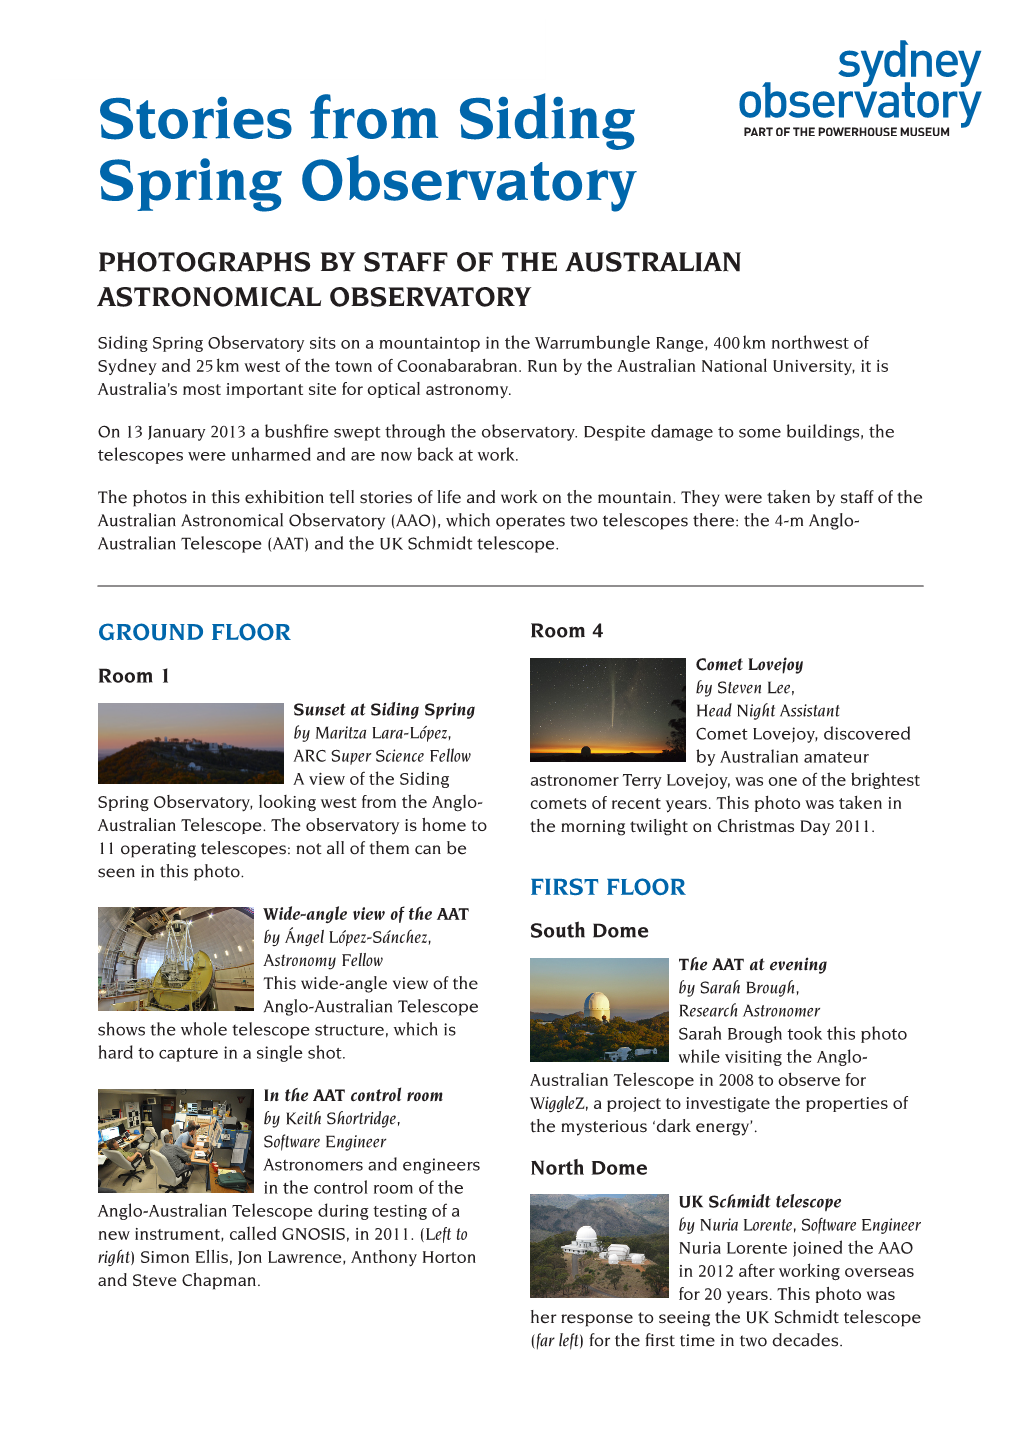 Stories from Siding Spring Observatory